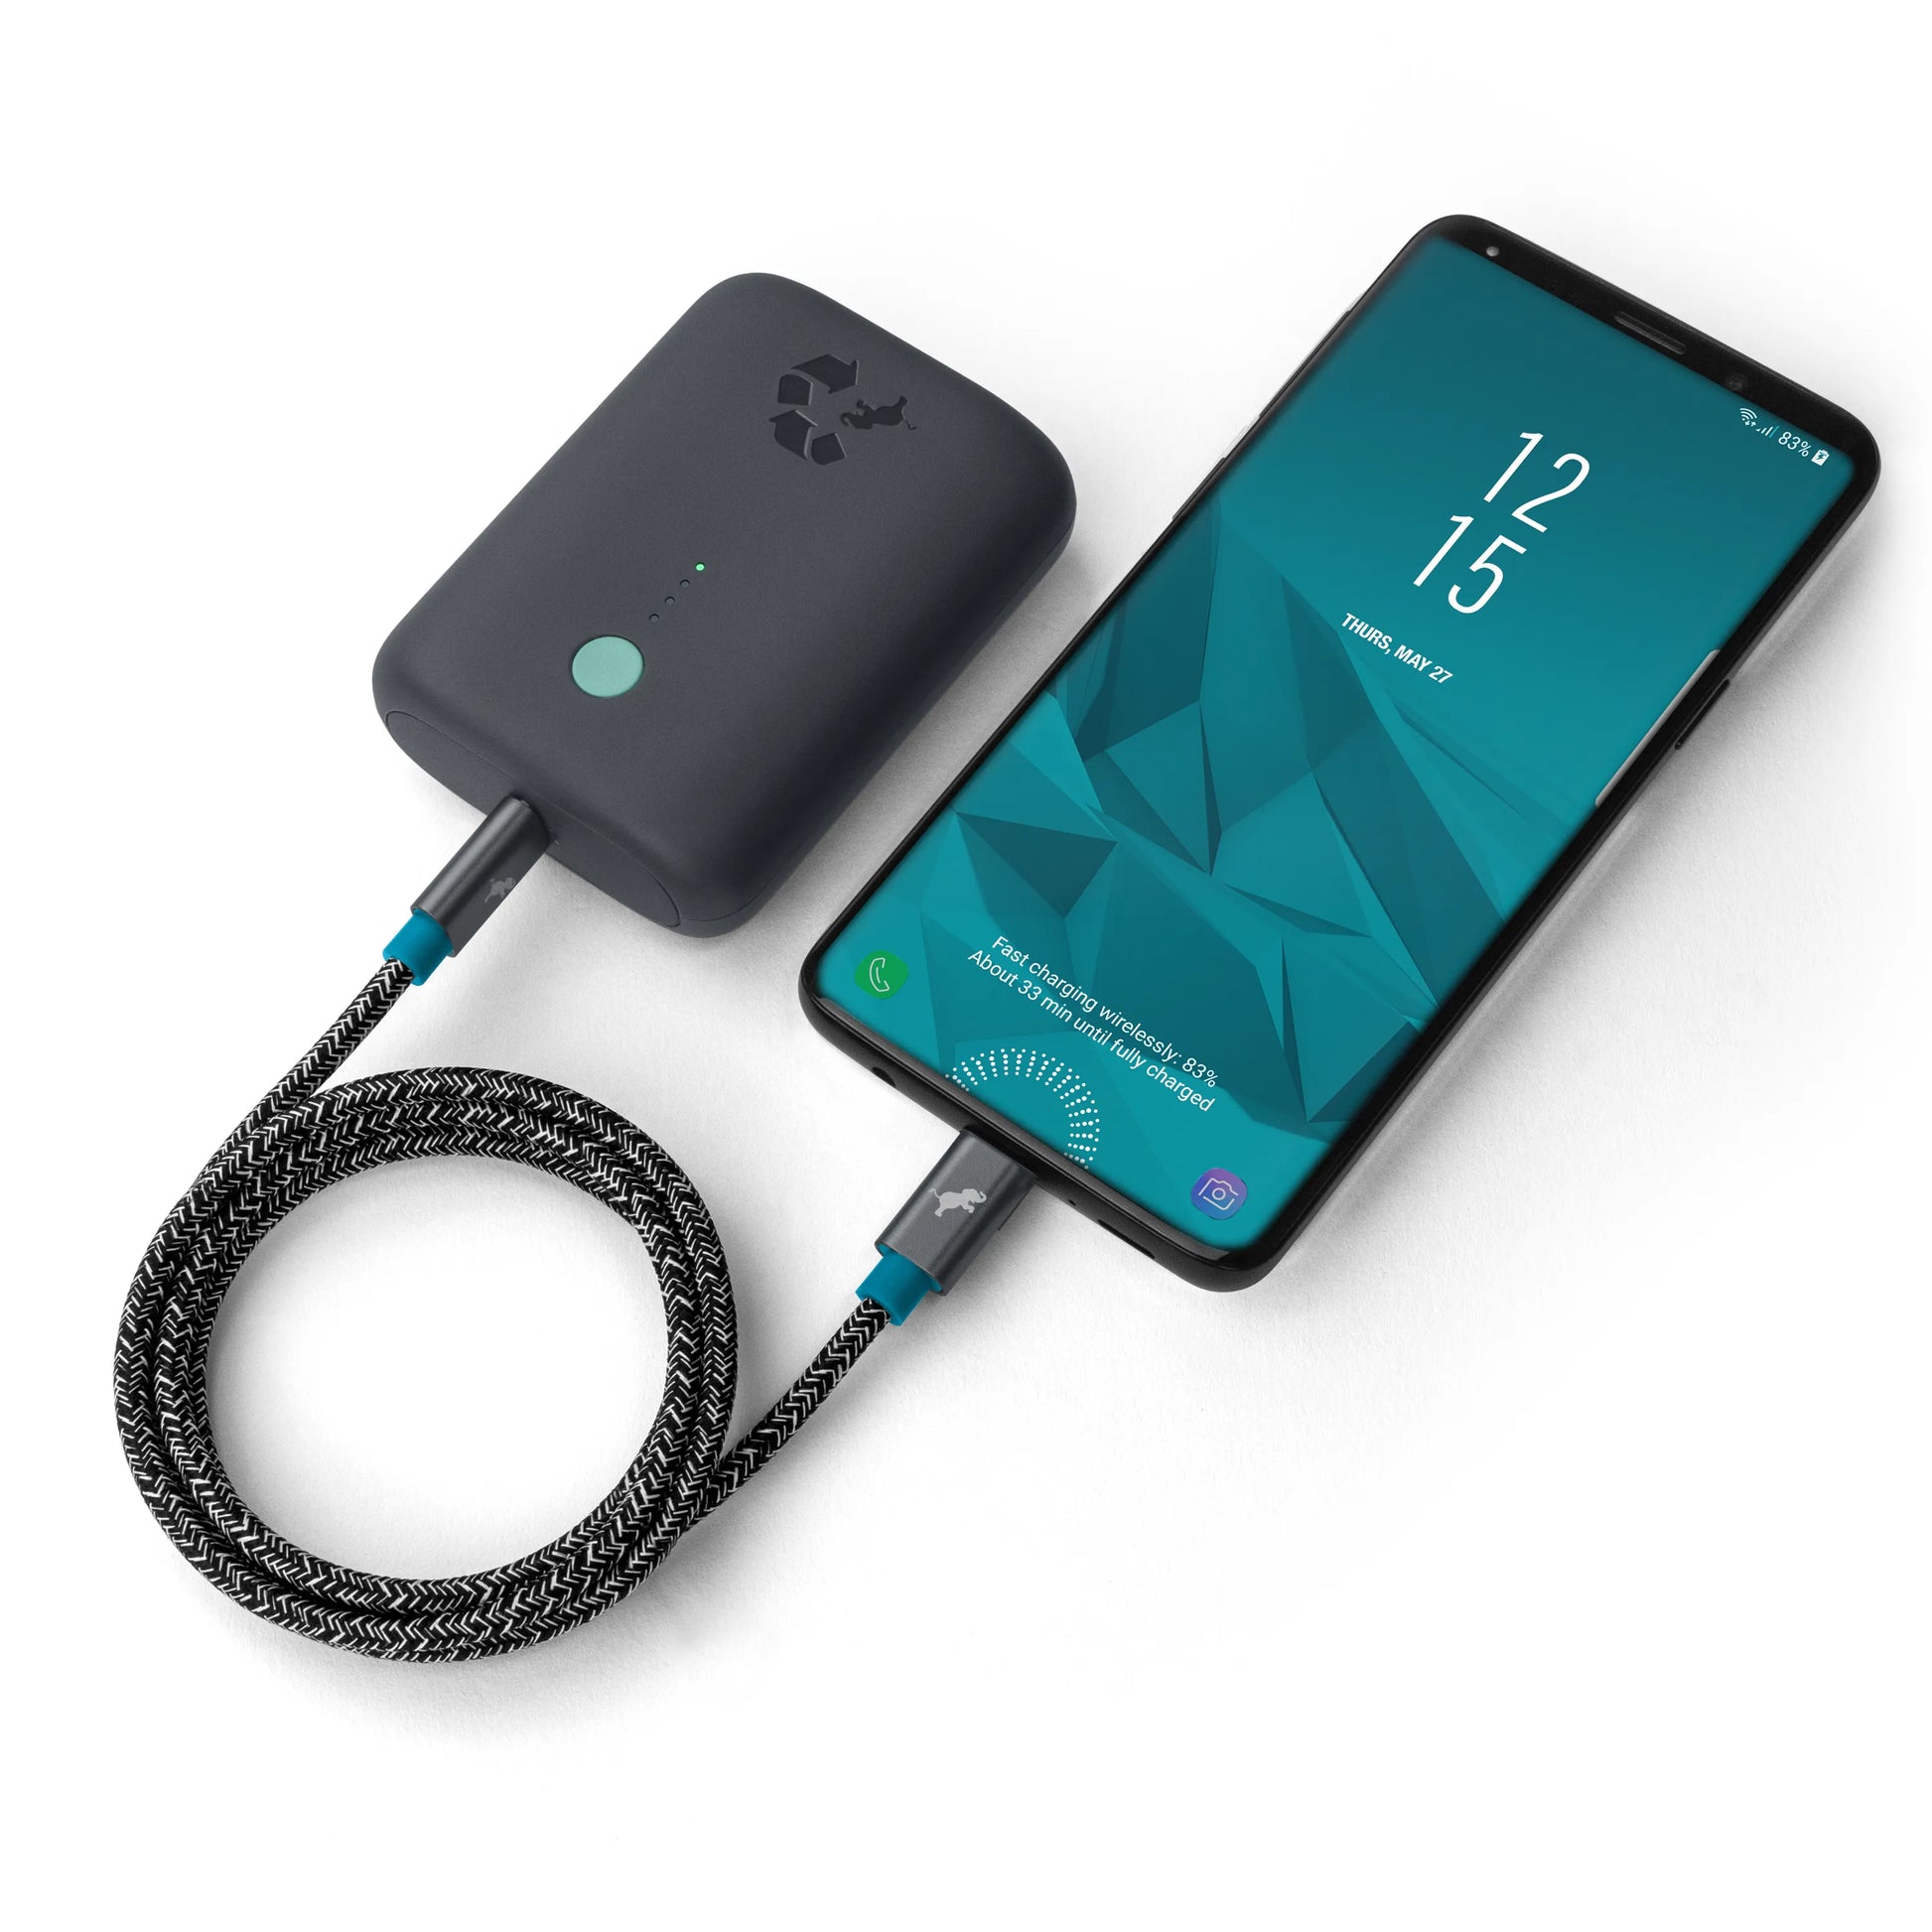 USB-C cable plugged into a phone and charger.